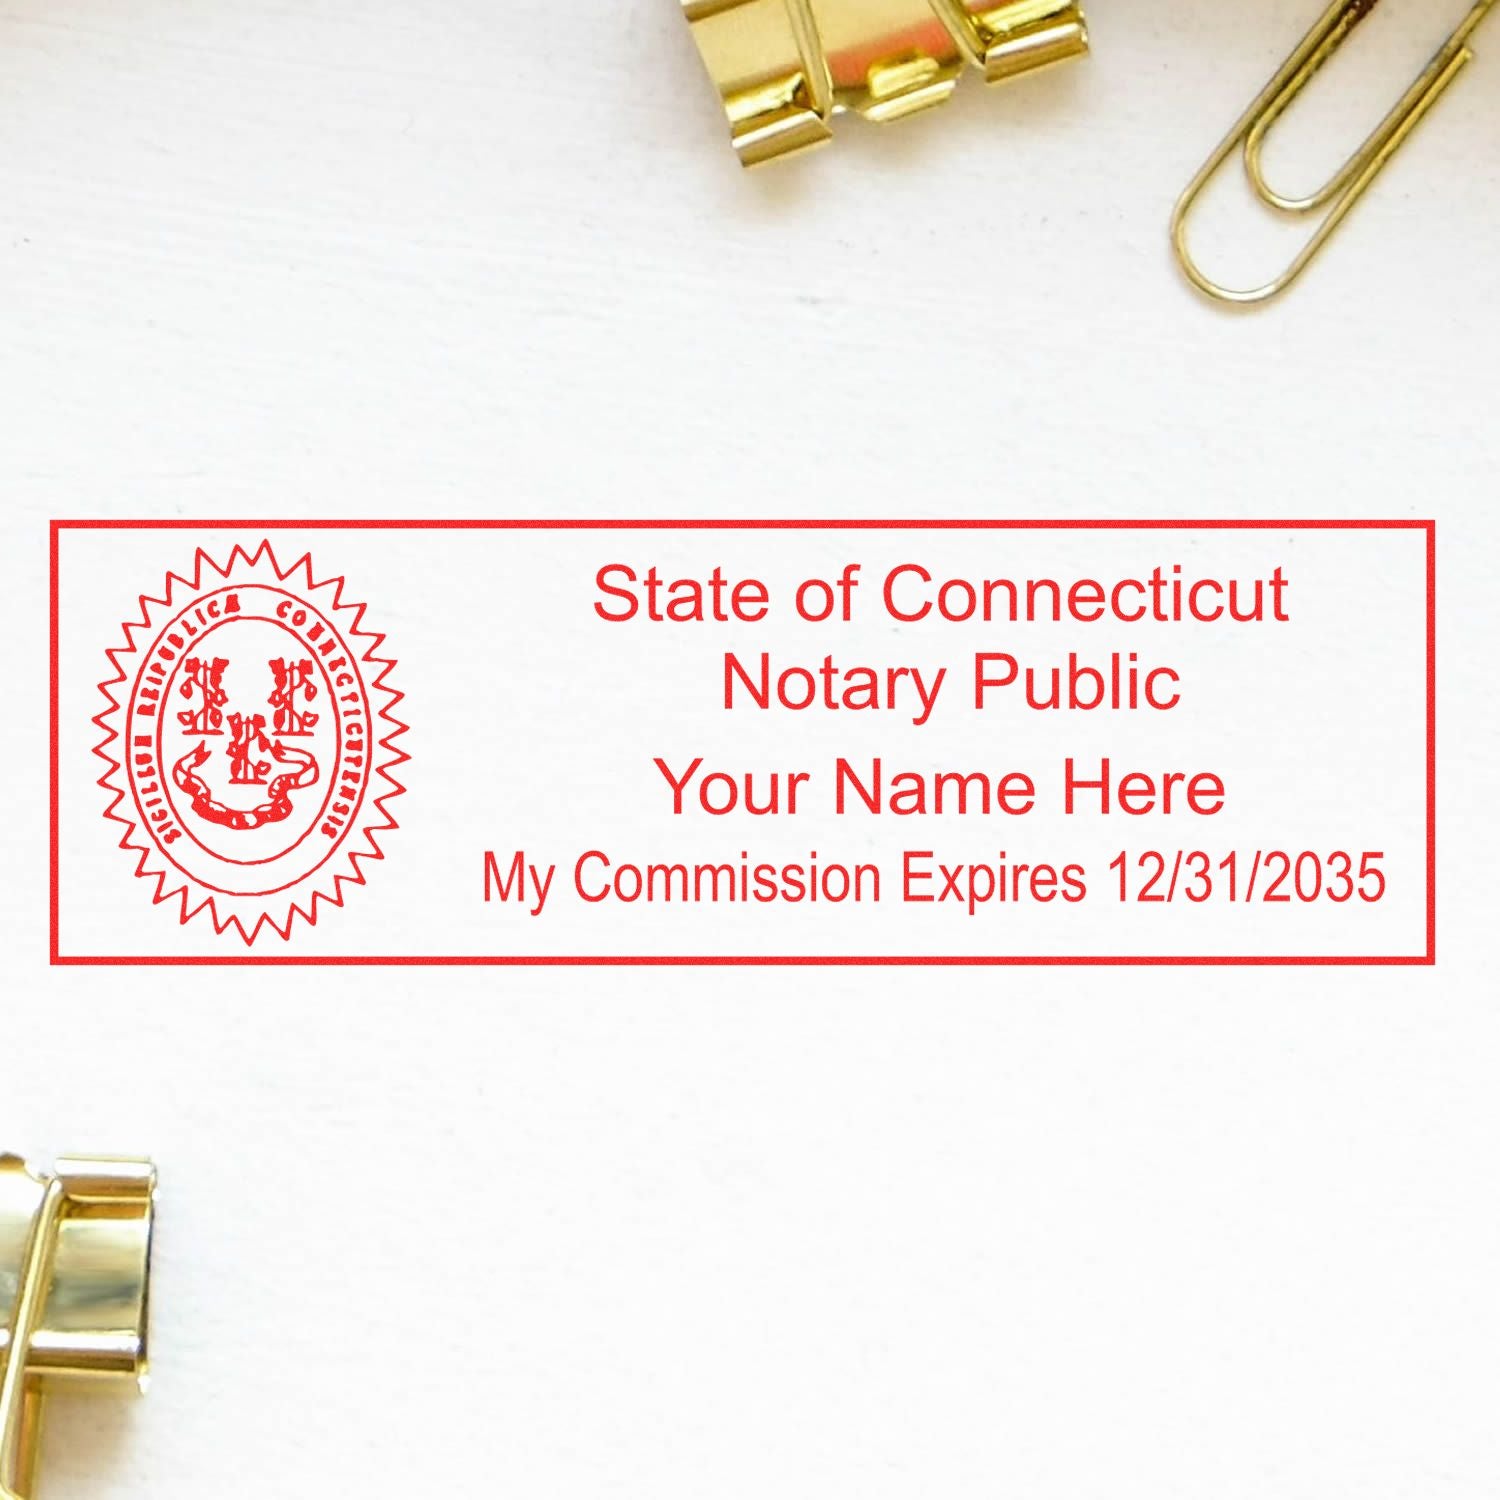 The main image for the PSI Connecticut Notary Stamp depicting a sample of the imprint and electronic files